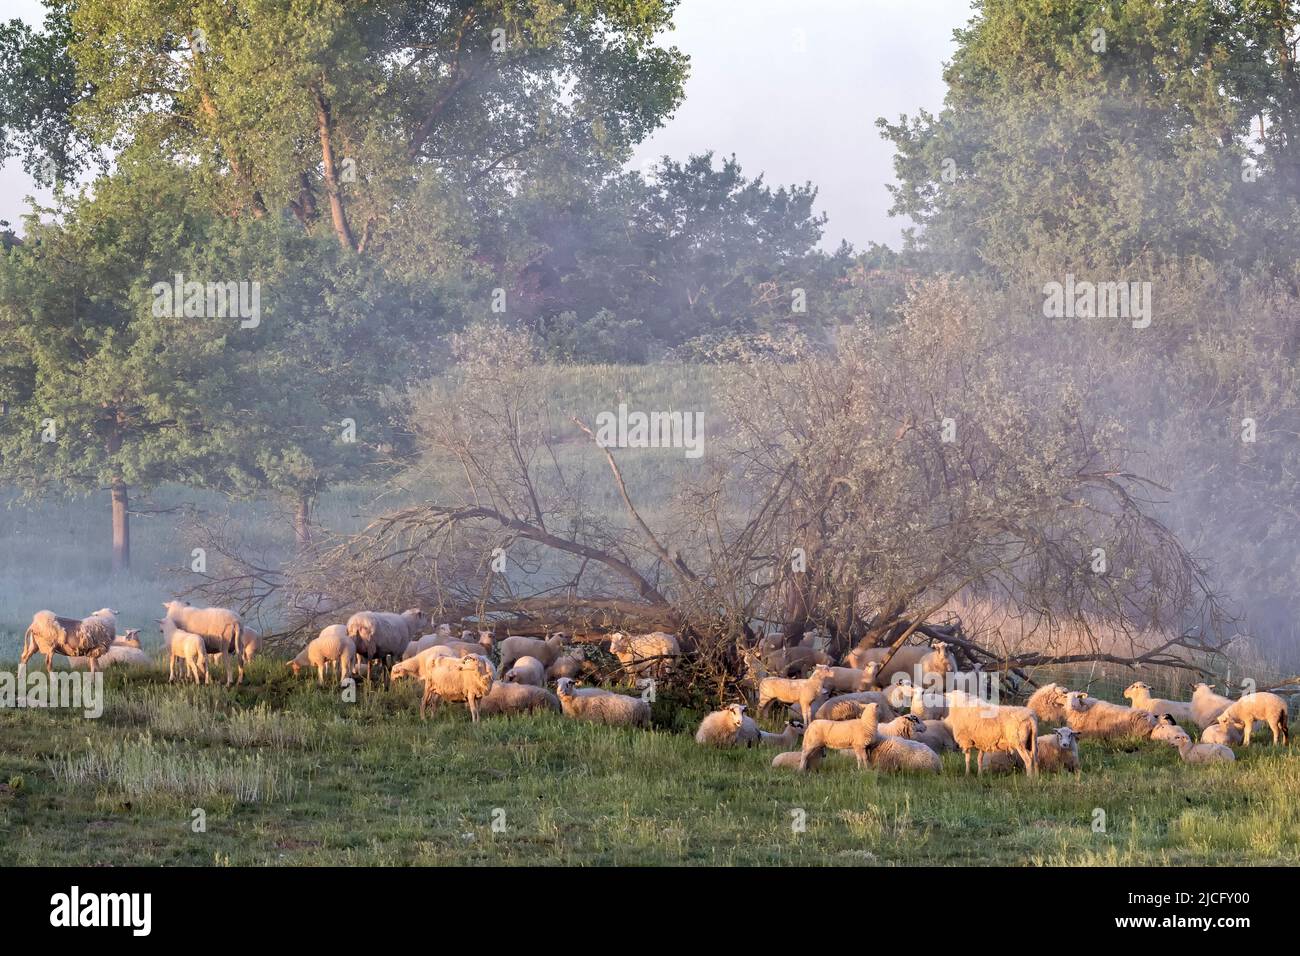 A flock of sheep in the early morning near Bleckede on the dike Stock Photo